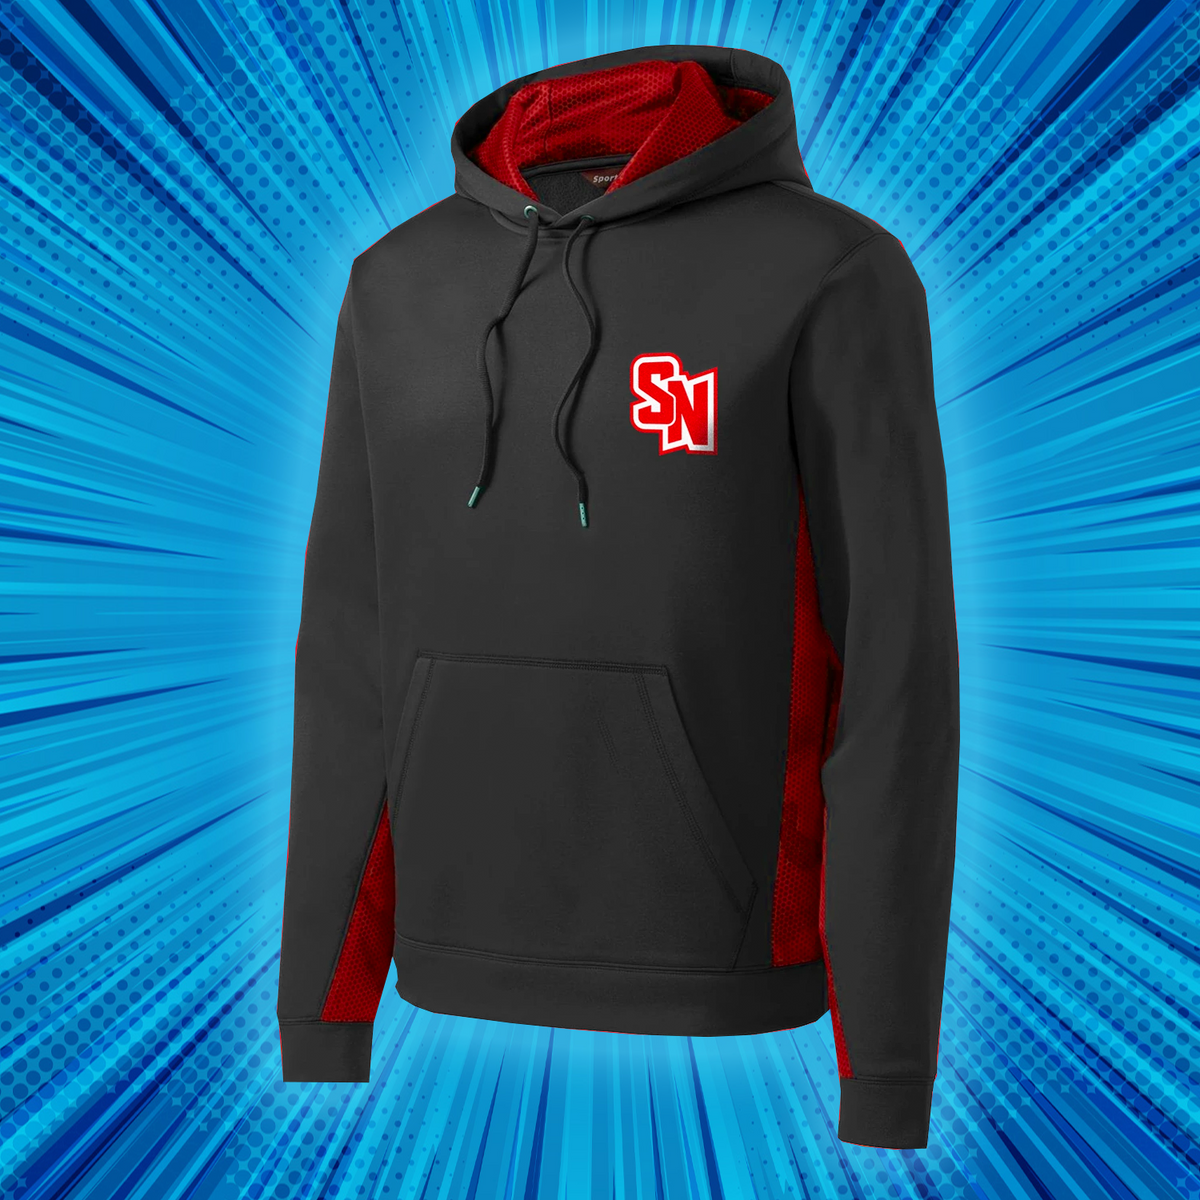 Spy Ninjas LCP Youth Tech Hoodie with Back Imprint - Black / Red